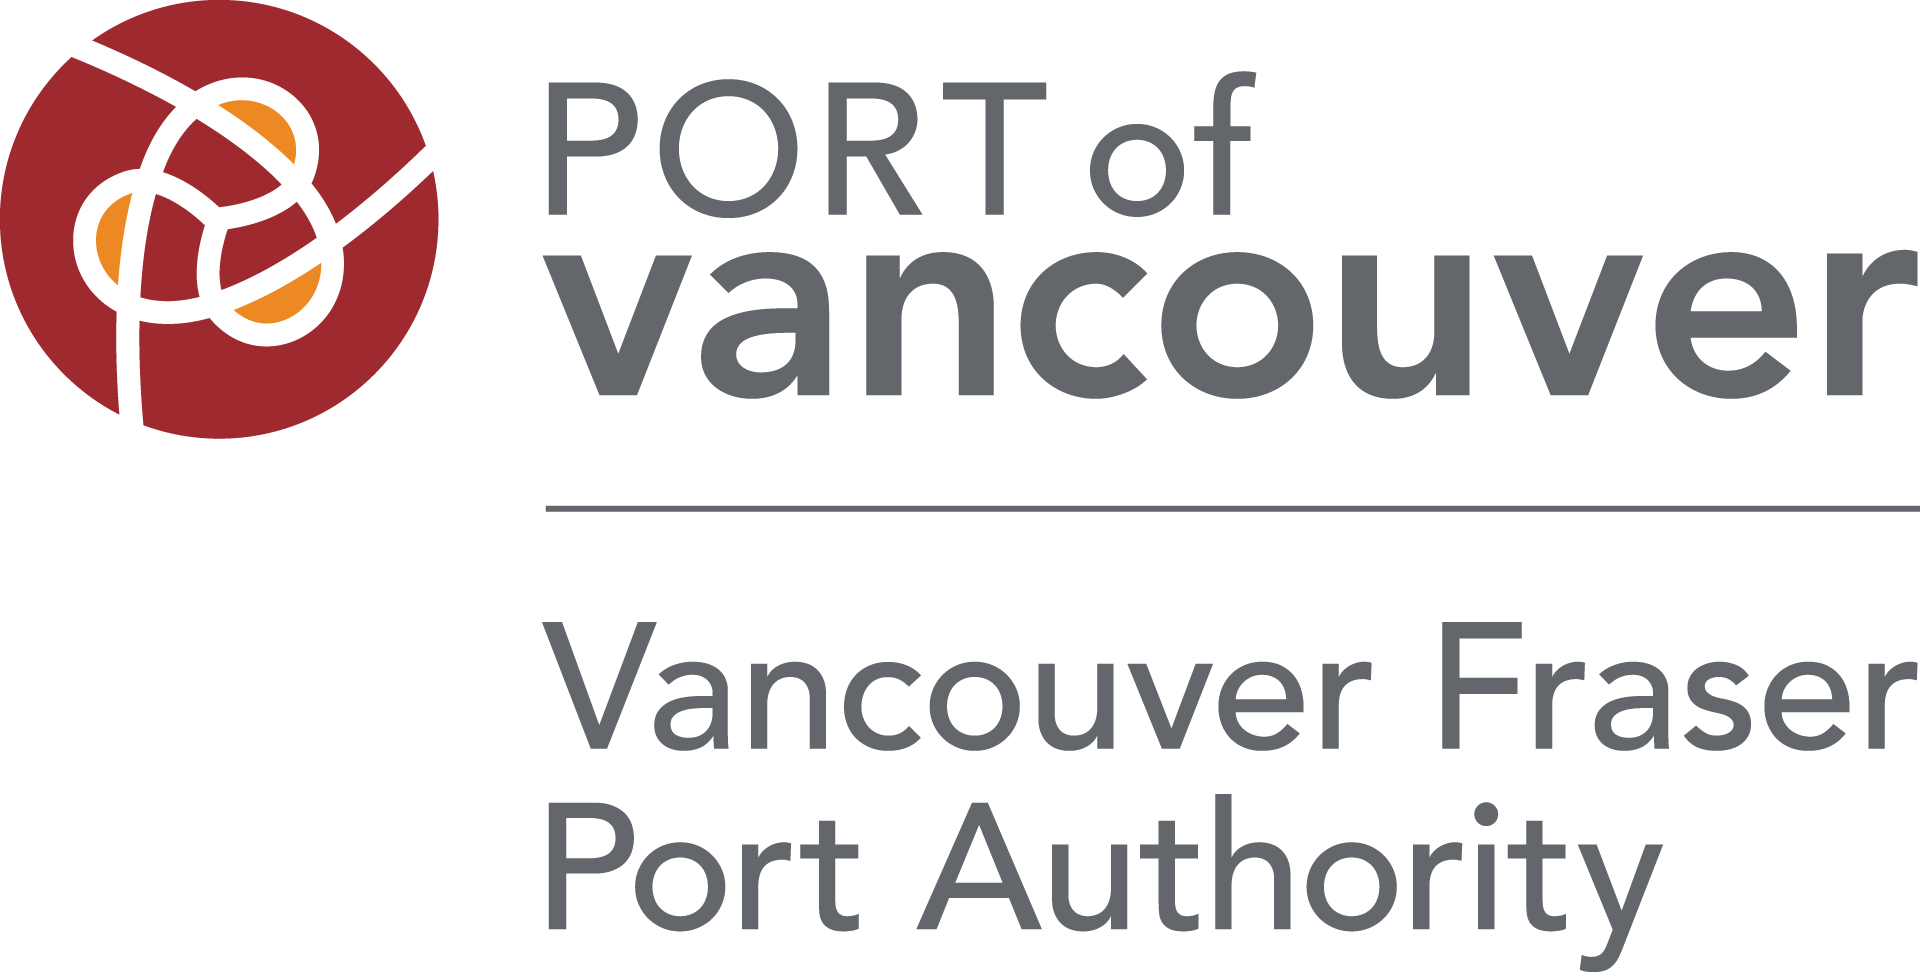 Vancouver Fraser Port Authority